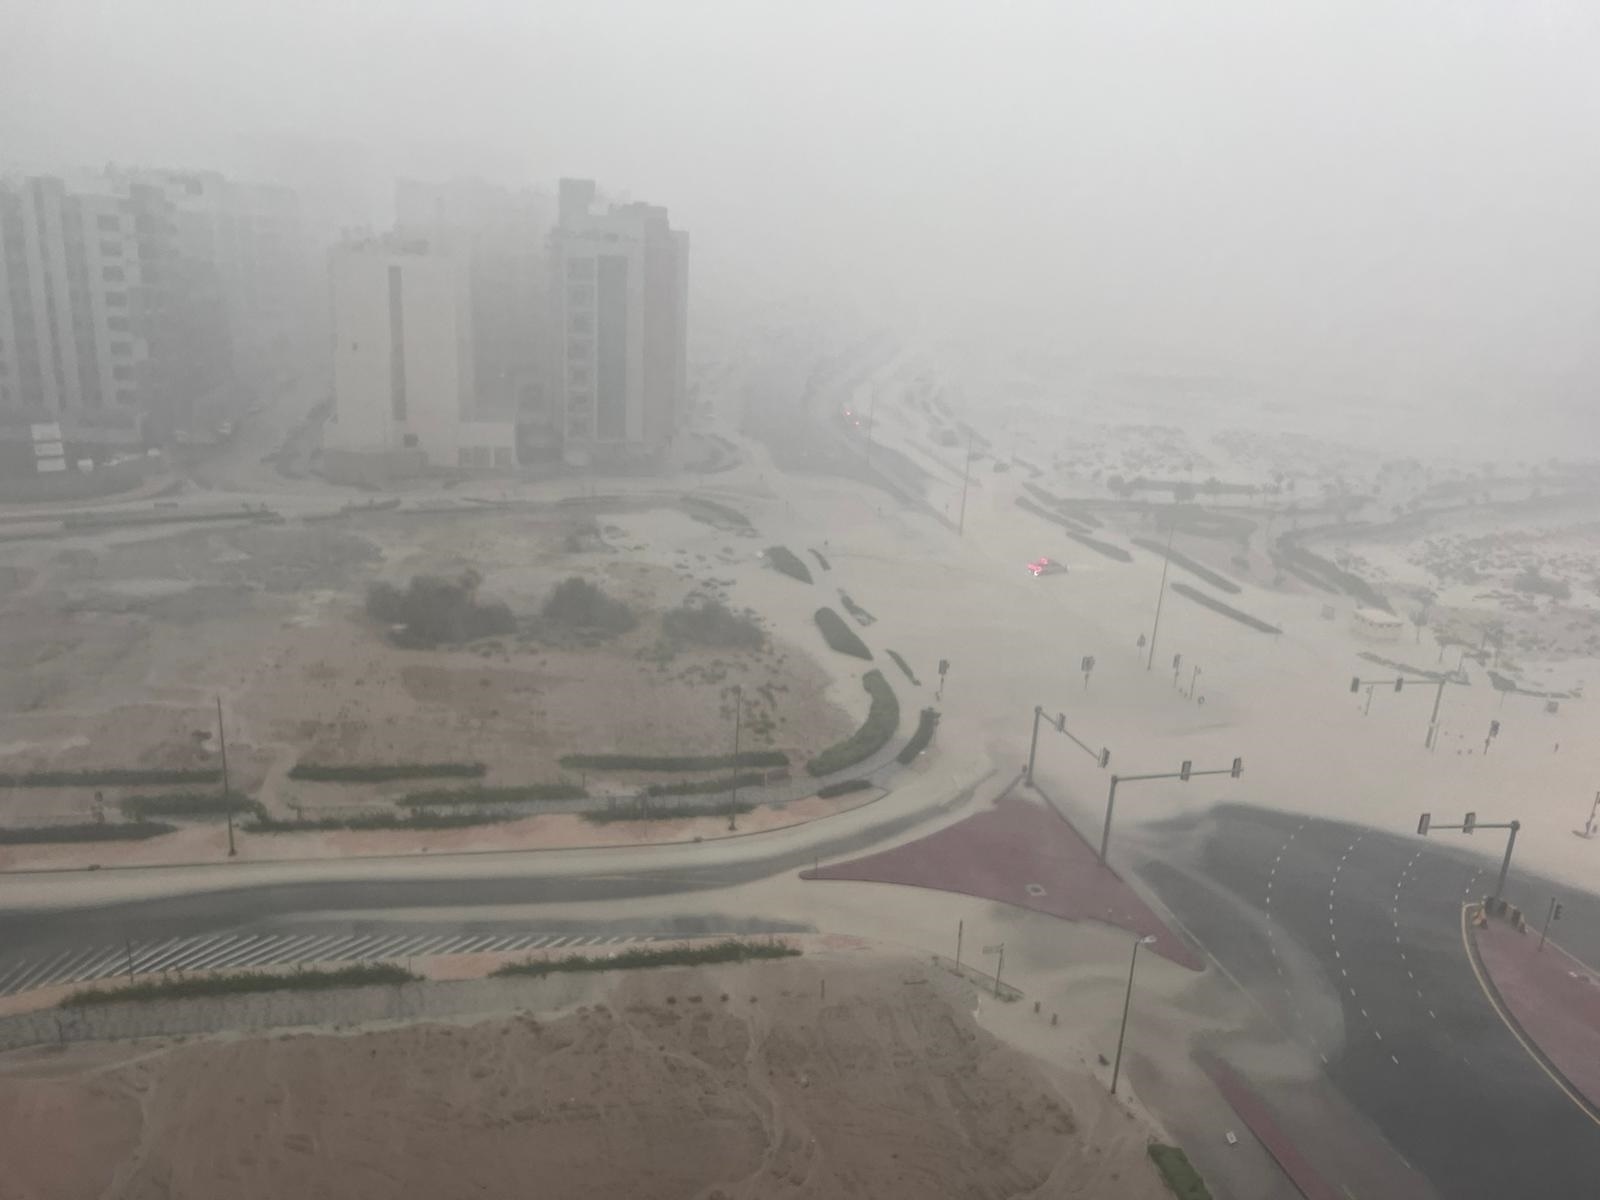 Dubai, UNITED ARAB EMIRATES  - Dubai Weather: Dubai is on high alert as storms continue to rage out in the Emirates as rains, strong winds, thunder, lightning, and hail batter the city. 

The city’s residents are also advised to avoid beaches, steer clear of sailing activities, and stay away from flood-prone areas and valleys.

BACKGRID UK 16 APRIL 2024,Image: 865345003, License: Rights-managed, Restrictions: , Model Release: no, Pictured: Dubai Storm, Credit line: Jules Annan / BACKGRID / Backgrid UK / Profimedia